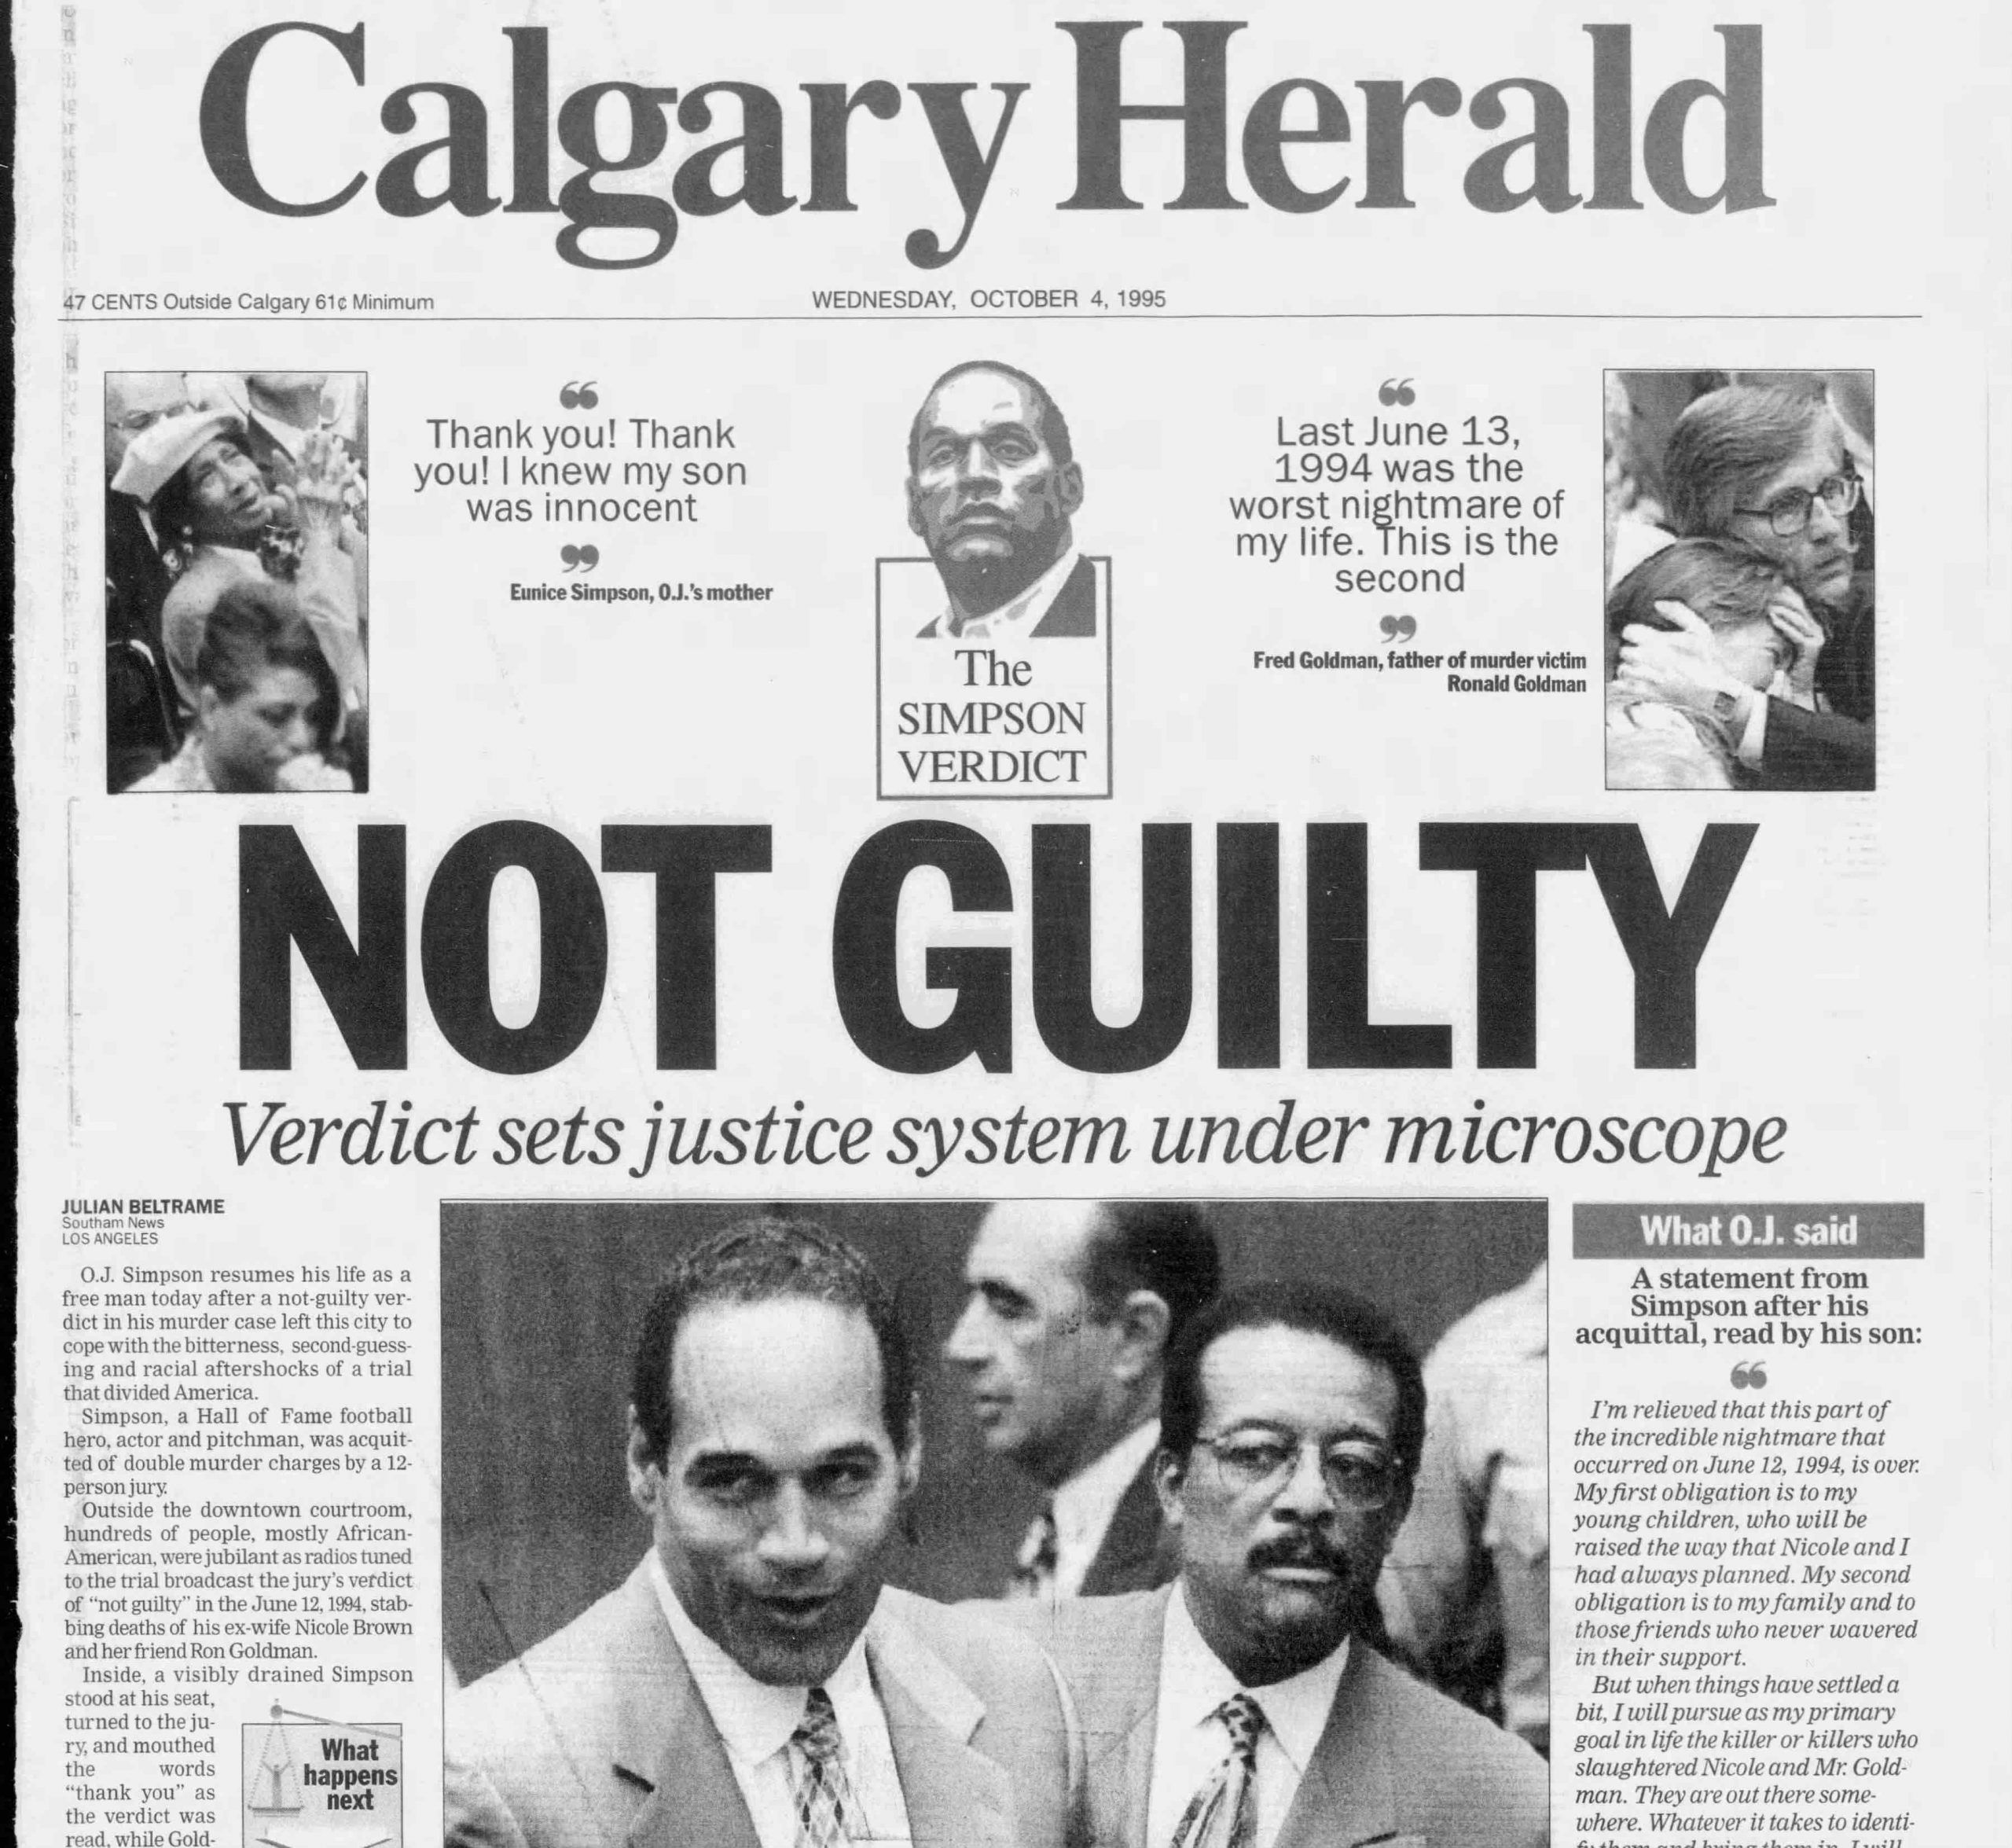 O.J. Simpson found not guilty 28 years ago today Calgary Herald